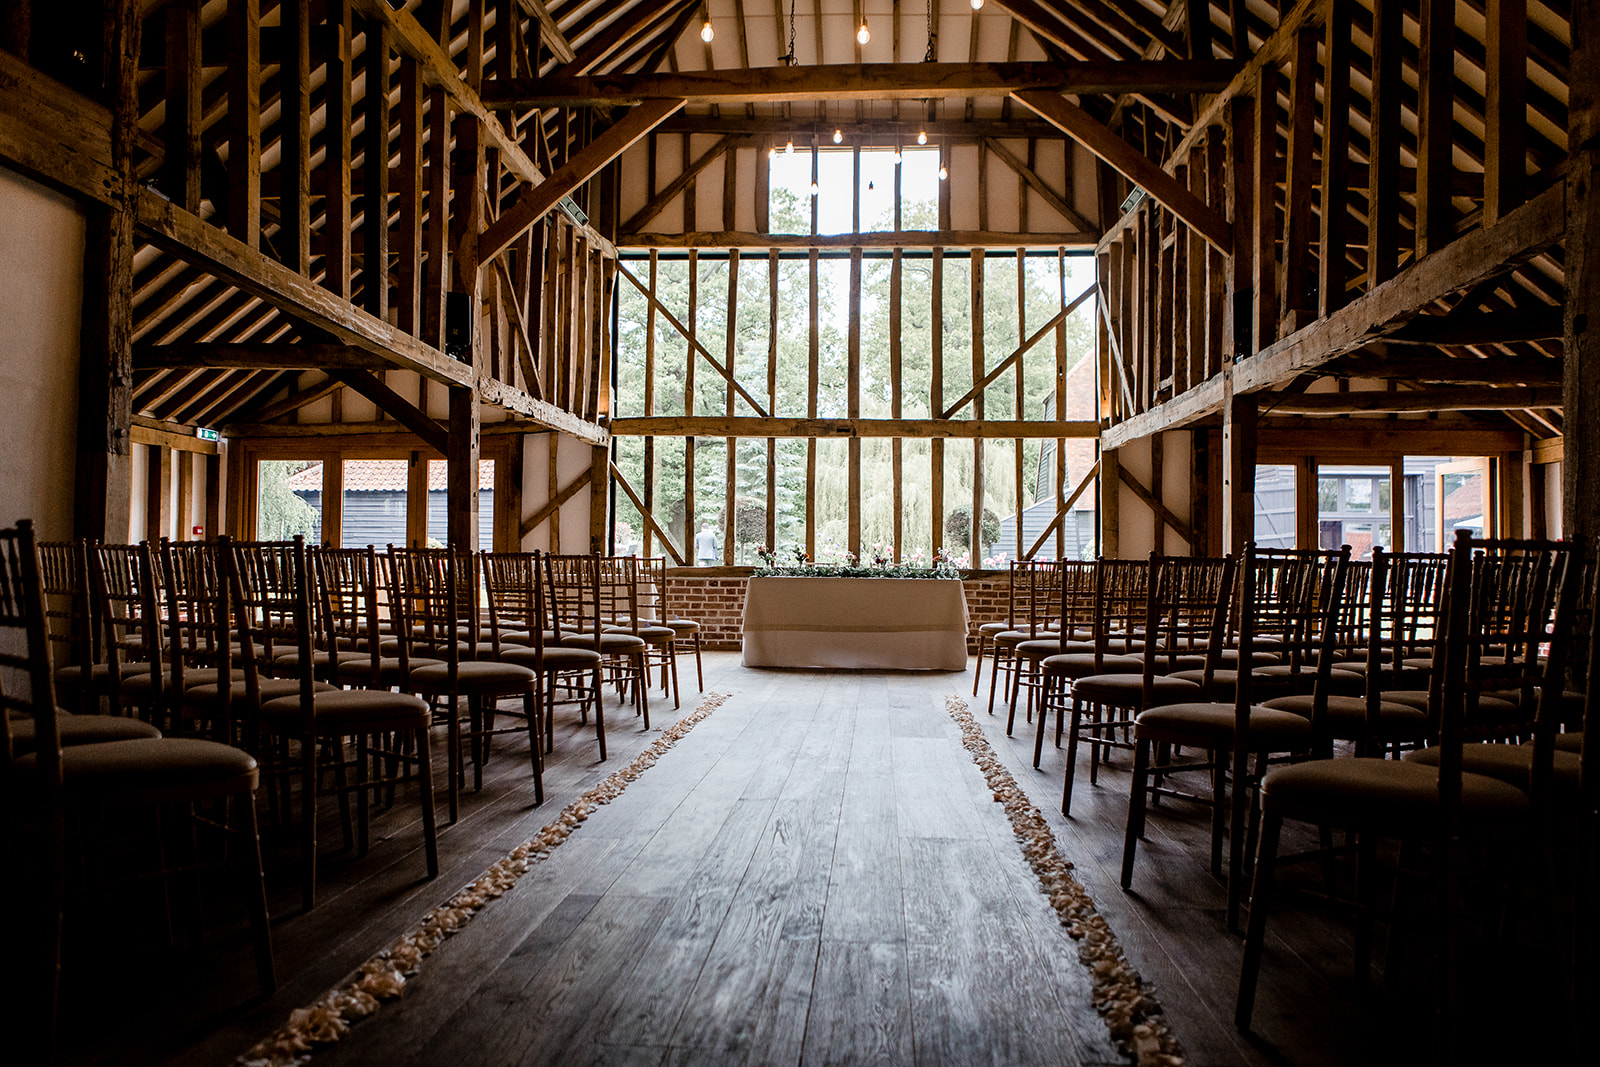 The ceremony room at the historic Blake Hall